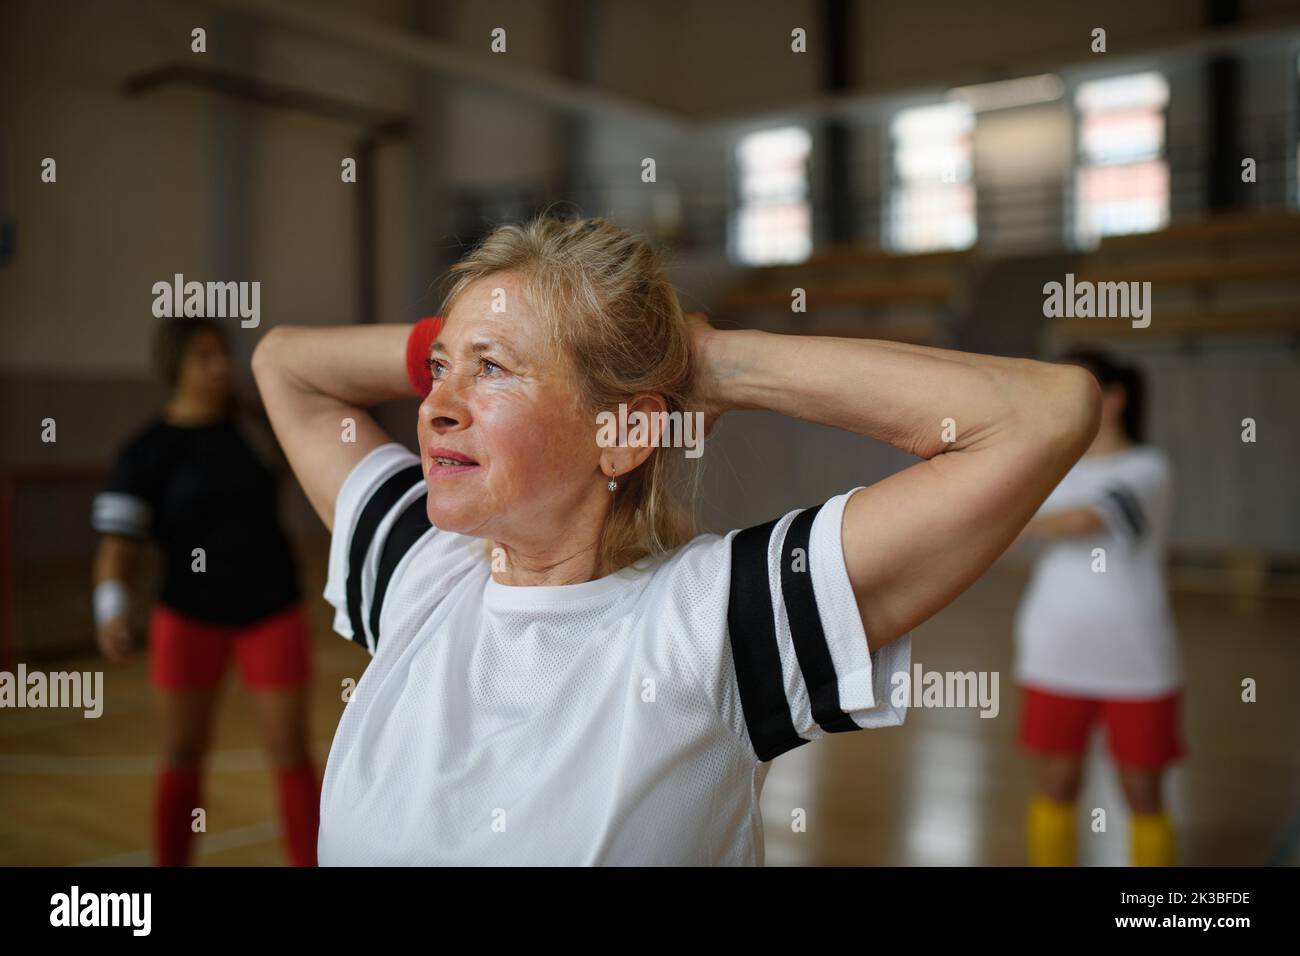 Senior woman stretching before basketball match in gym. Stock Photo